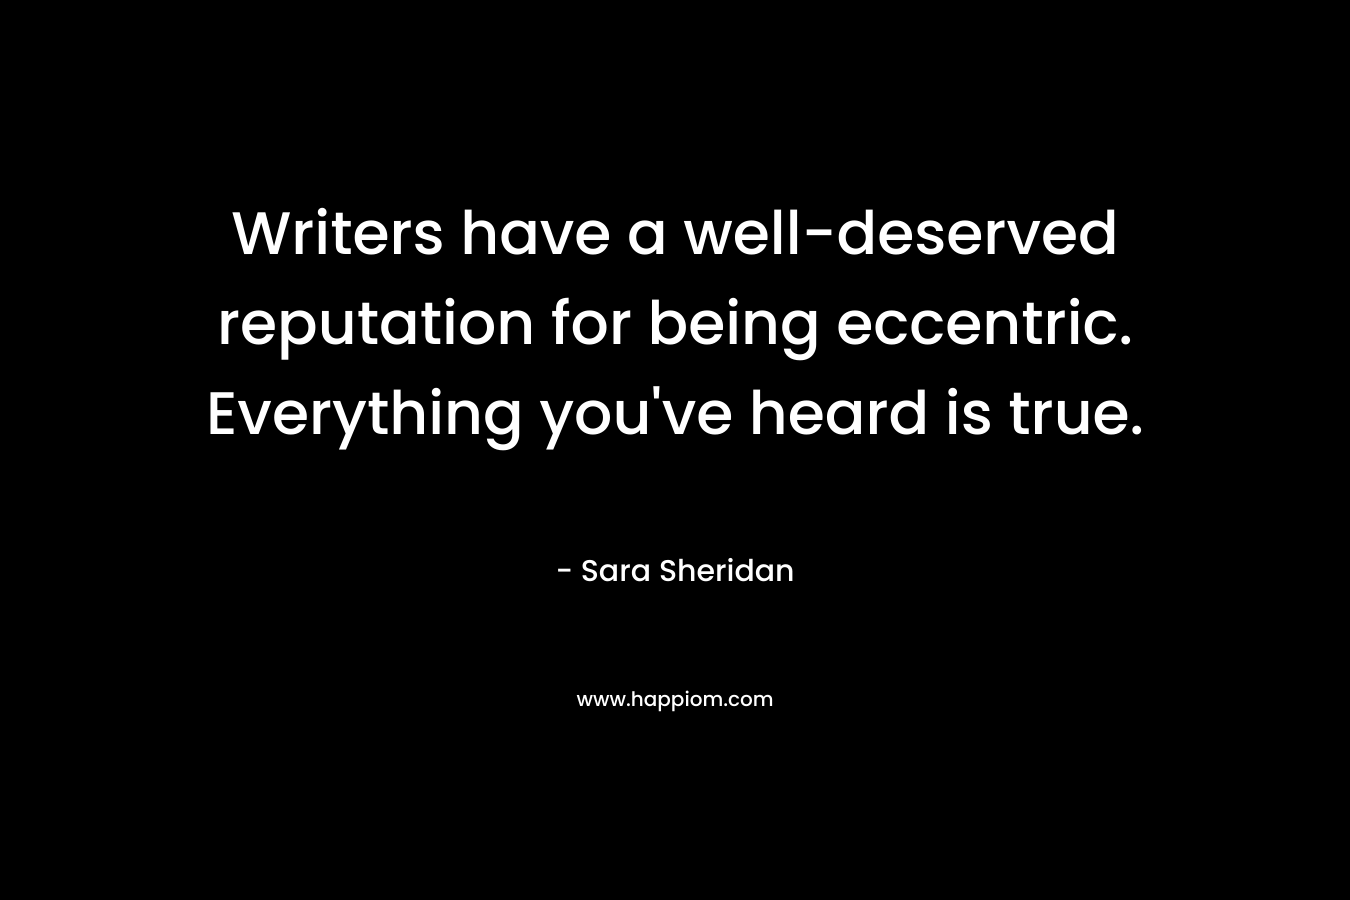 Writers have a well-deserved reputation for being eccentric. Everything you've heard is true.